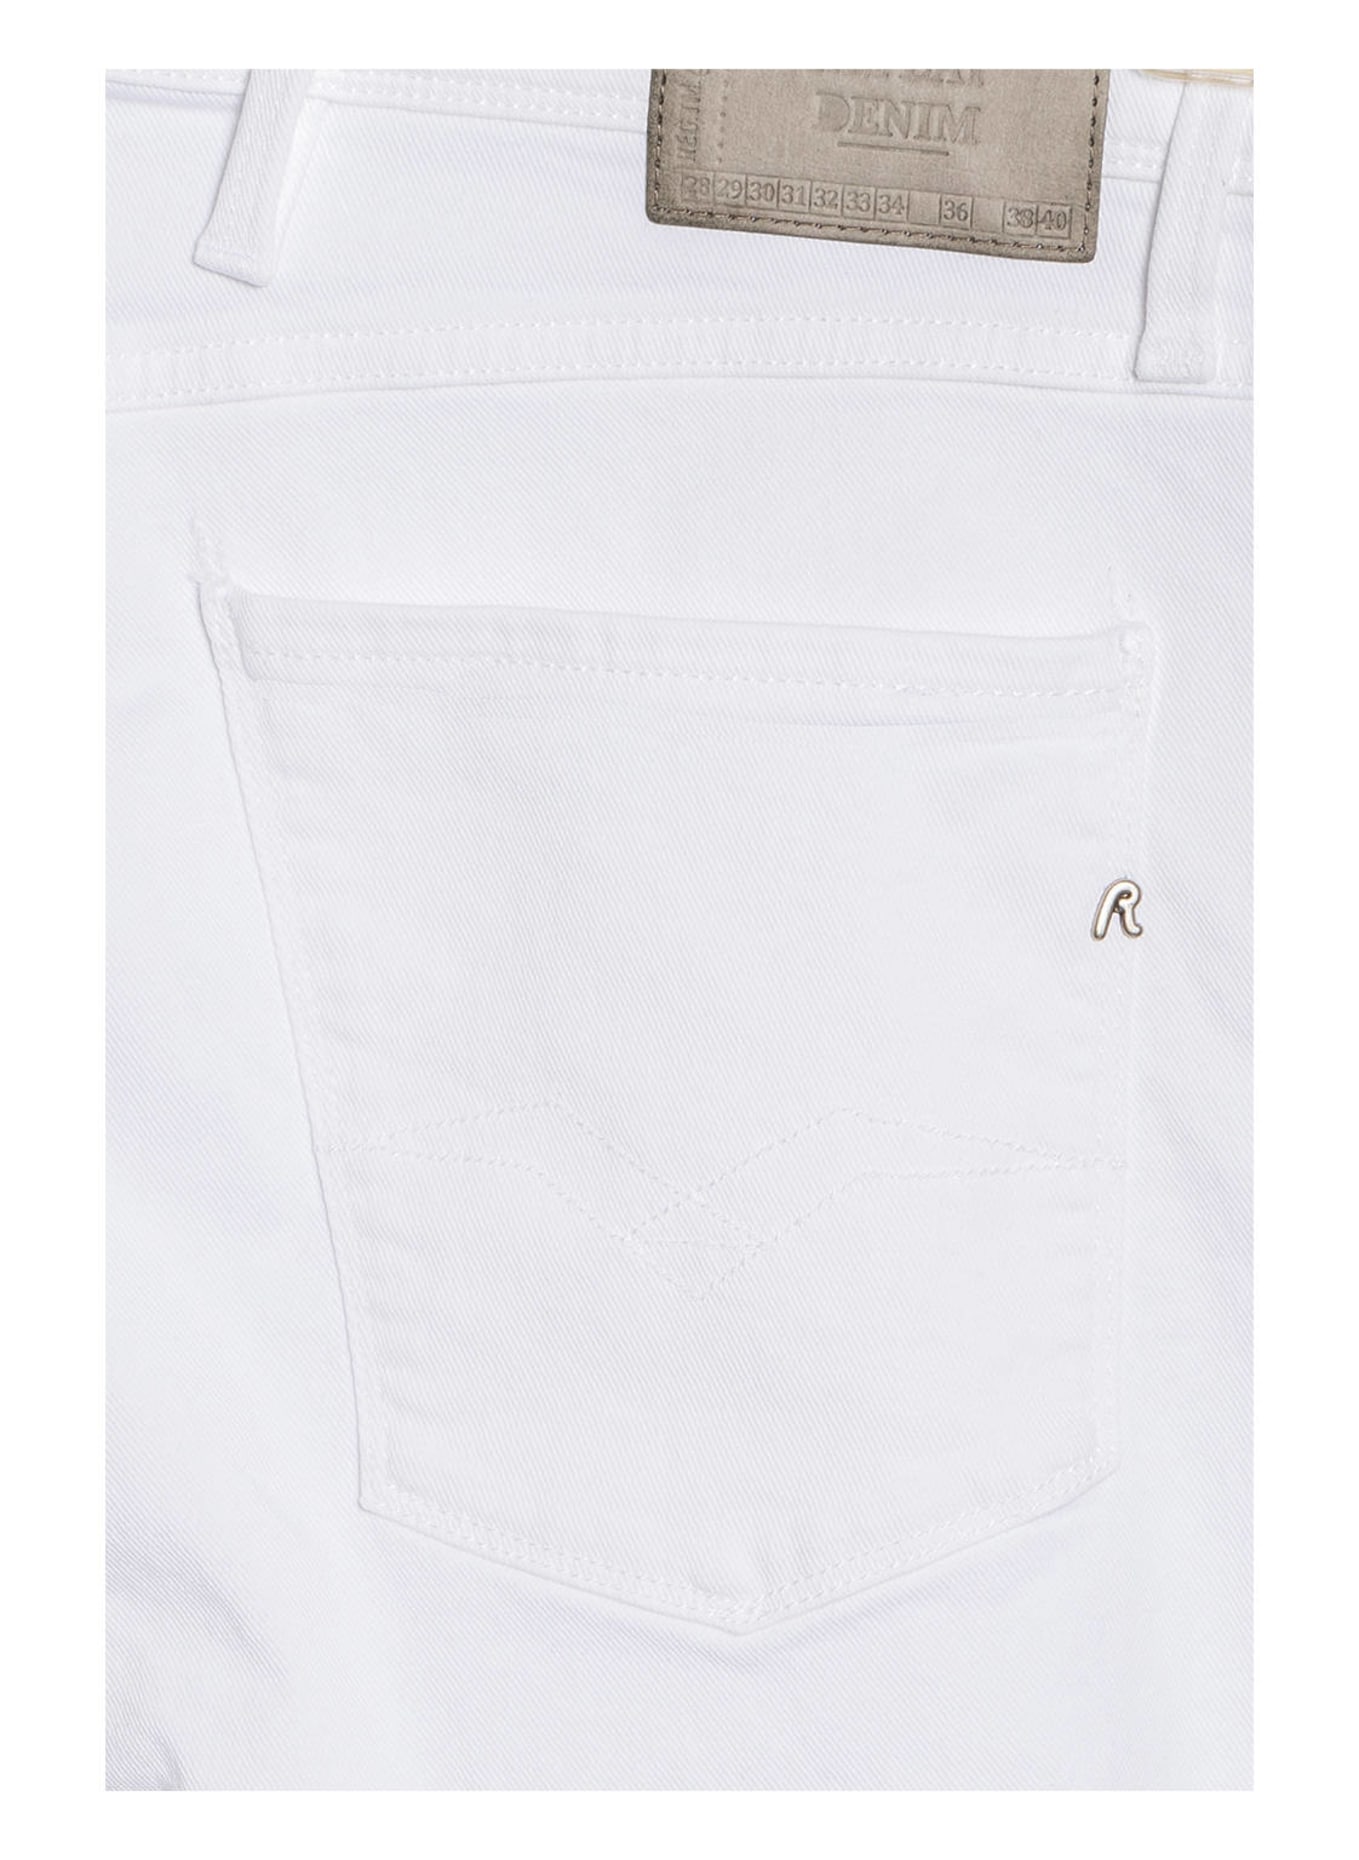 REPLAY Jeans ANBASS Extra Slim Fit, Farbe: 001 WHITE (Bild 5)